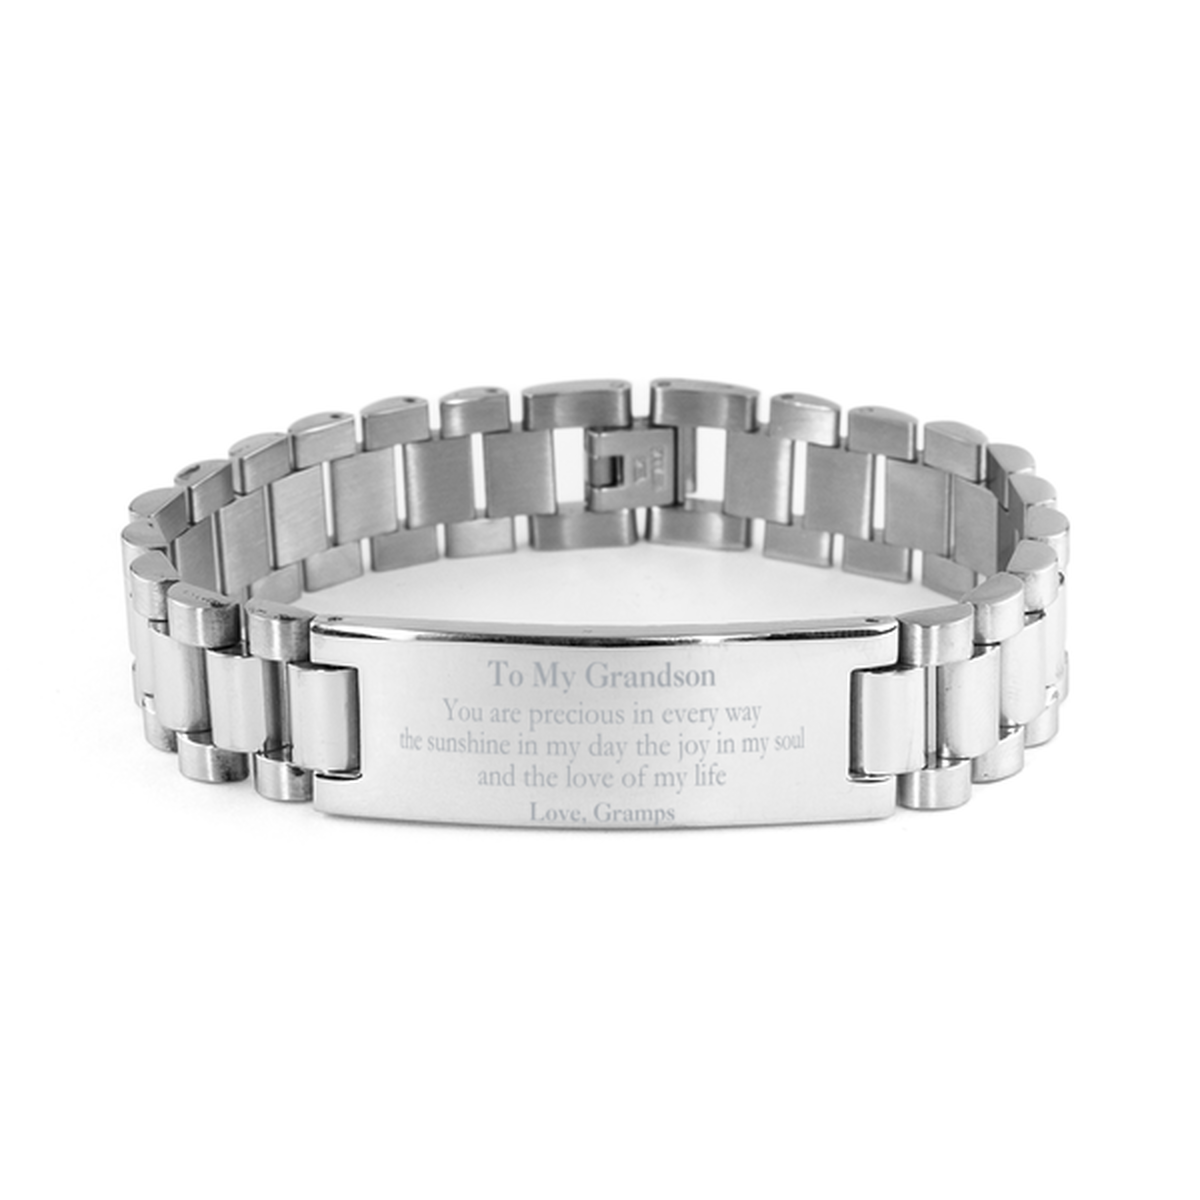 Graduation Gifts for Grandson Ladder Stainless Steel Bracelet Present from Gramps, Christmas Grandson Birthday Gifts Grandson You are precious in every way the sunshine in my day. Love, Gramps